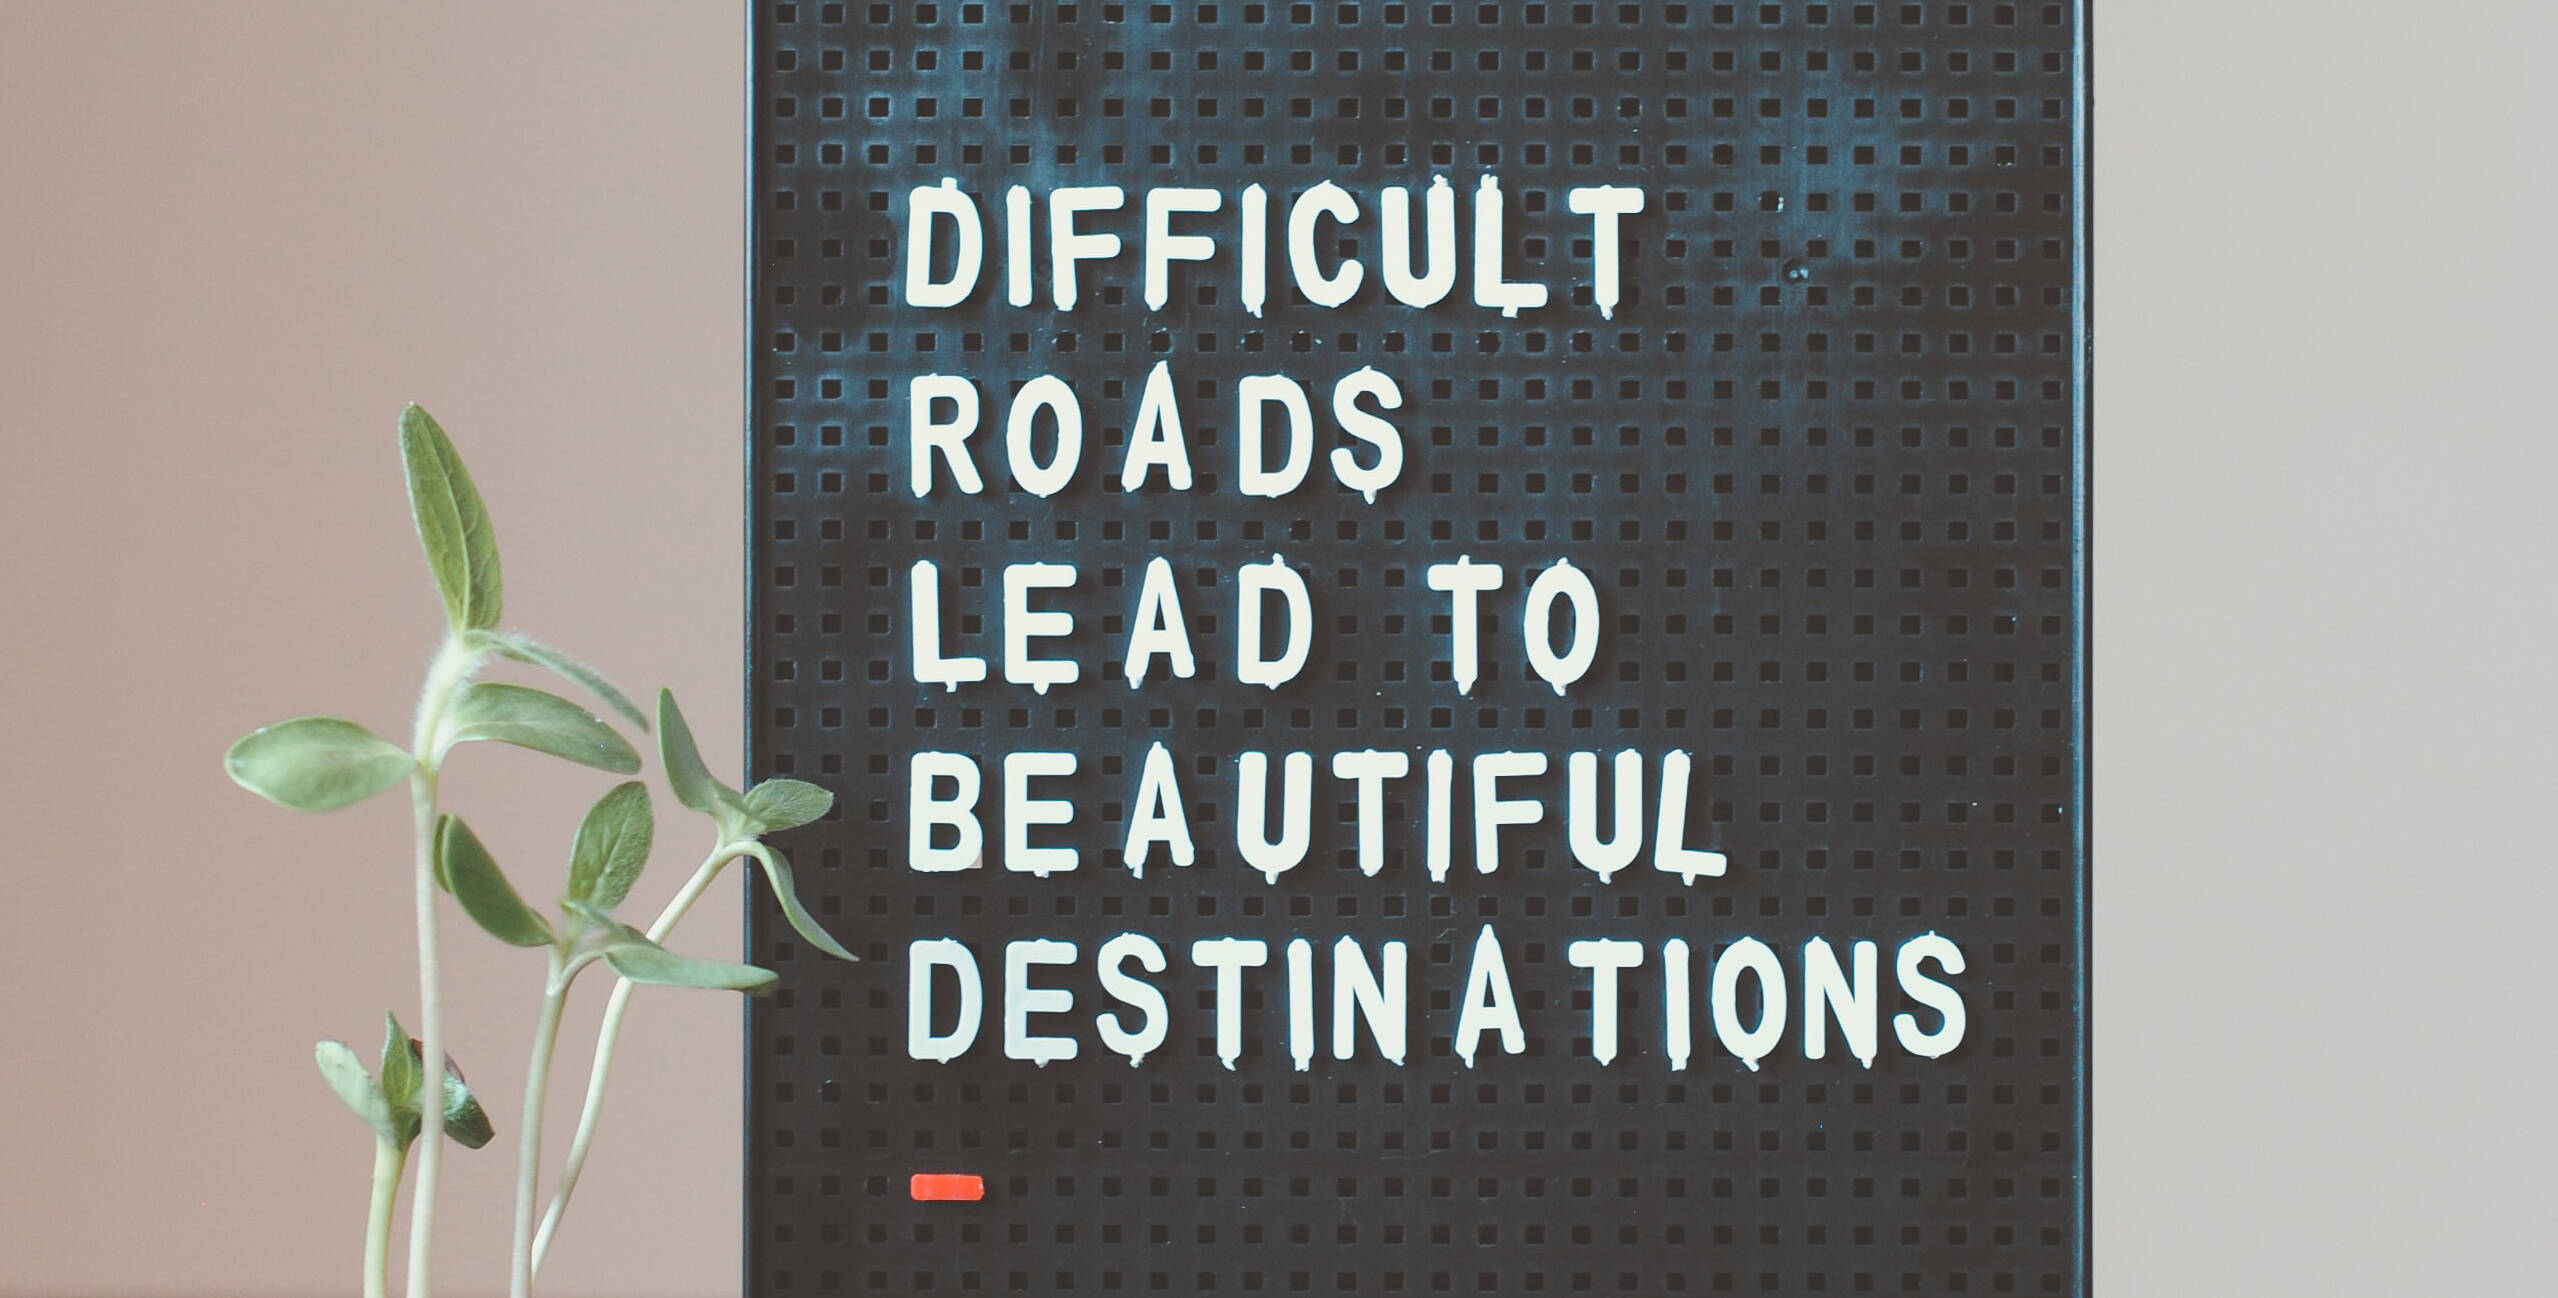 Clipboard with "Difficult roads lead to beautiful destinations" text